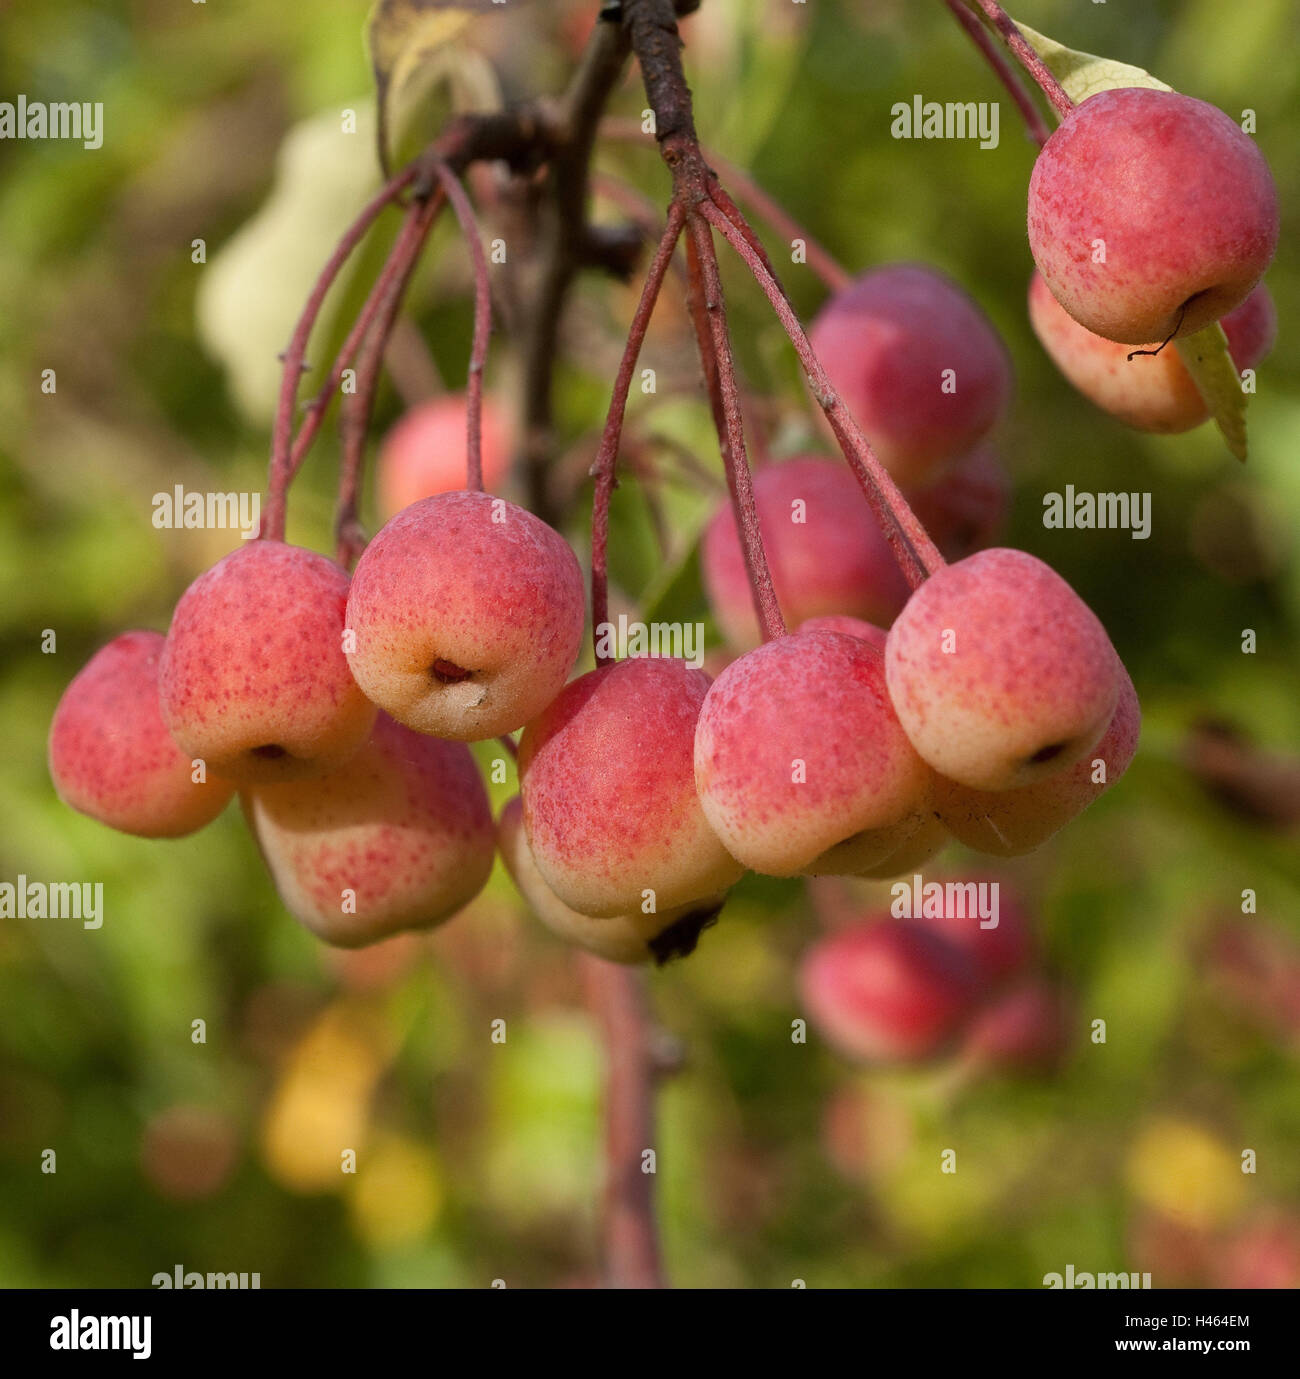 Apple-tree, wild apple, Malus transitoria, fruits in the tree, Nordwestchina, apple-tree, apples, wild apples, Malus, fruit, wild fruit, pomes, pomes plants, Rosaceae, fruits, Stock Photo